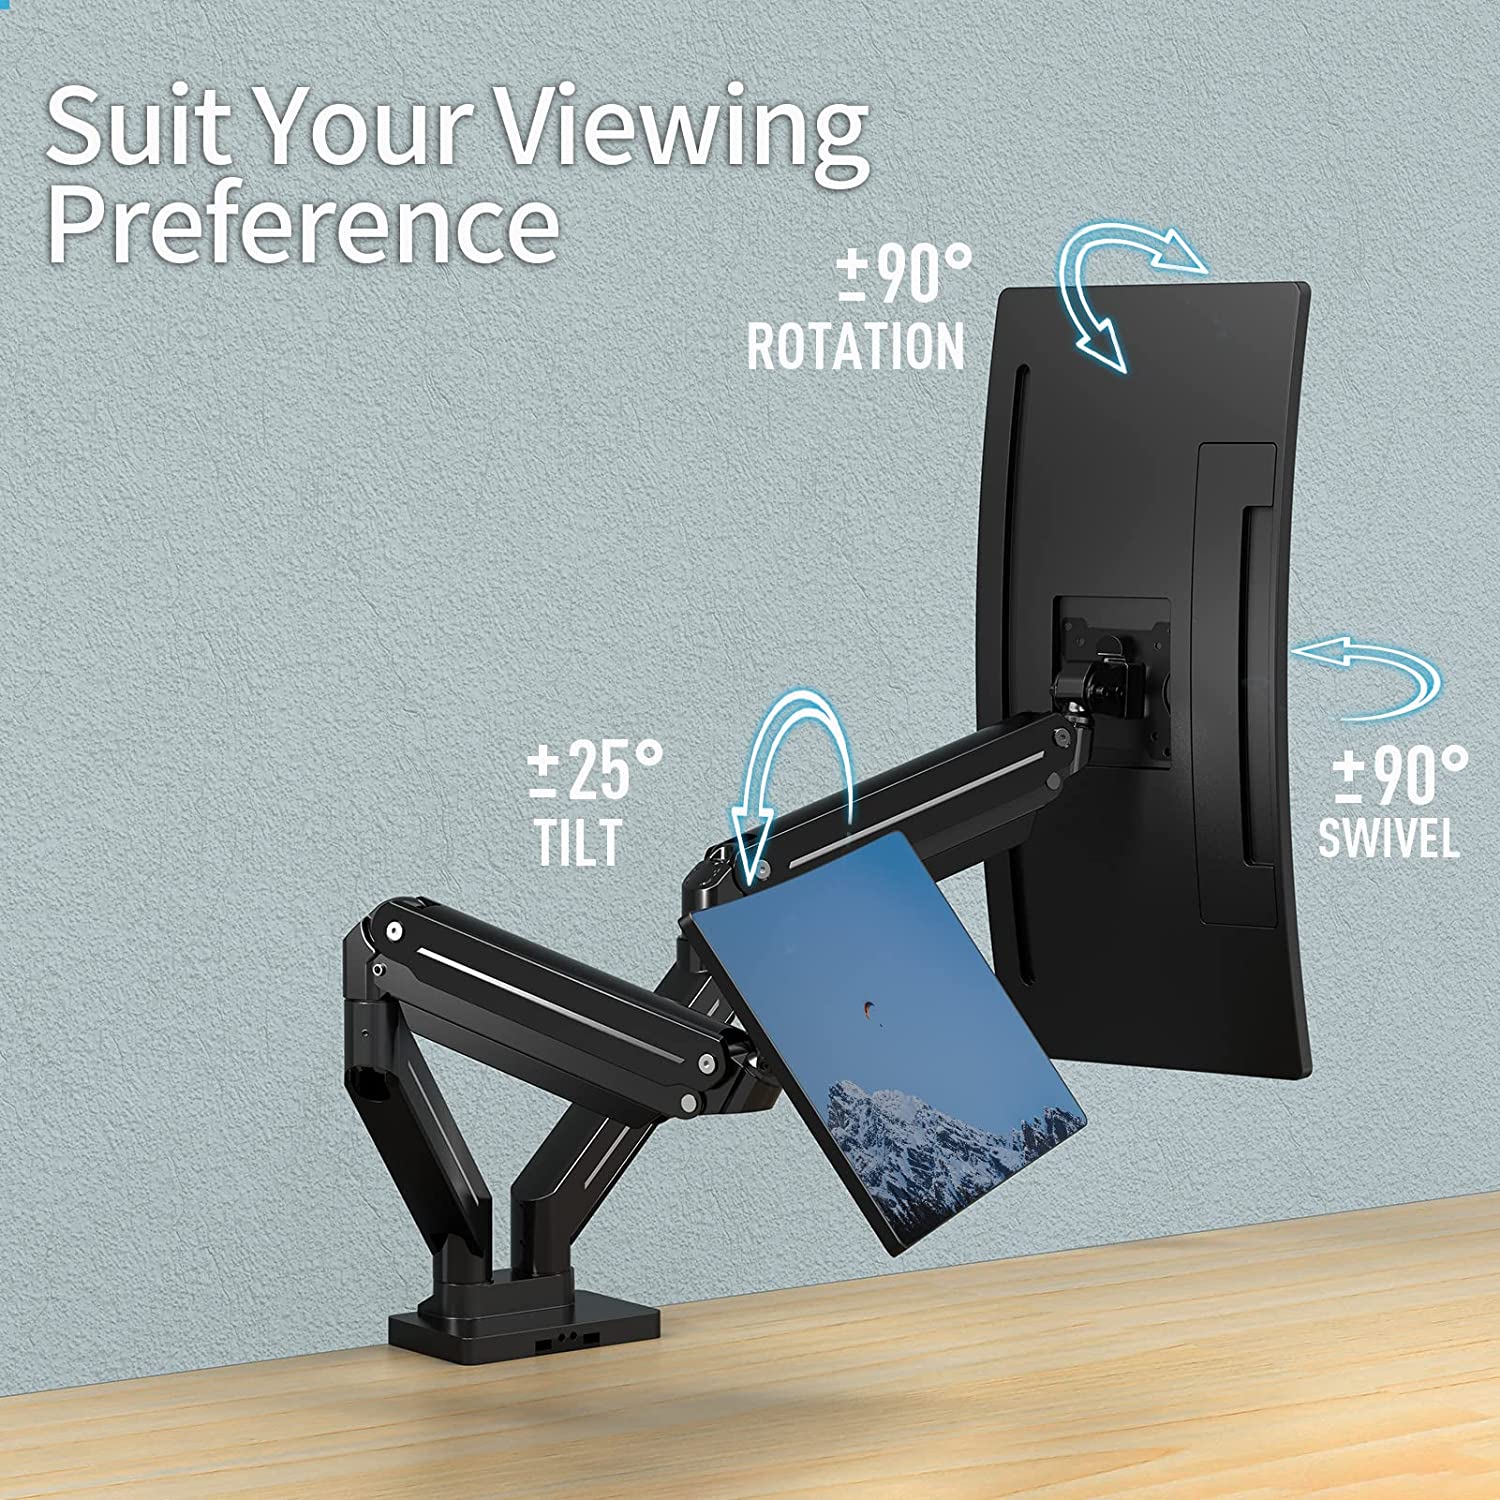 dual monitor mount suits your viewing preference